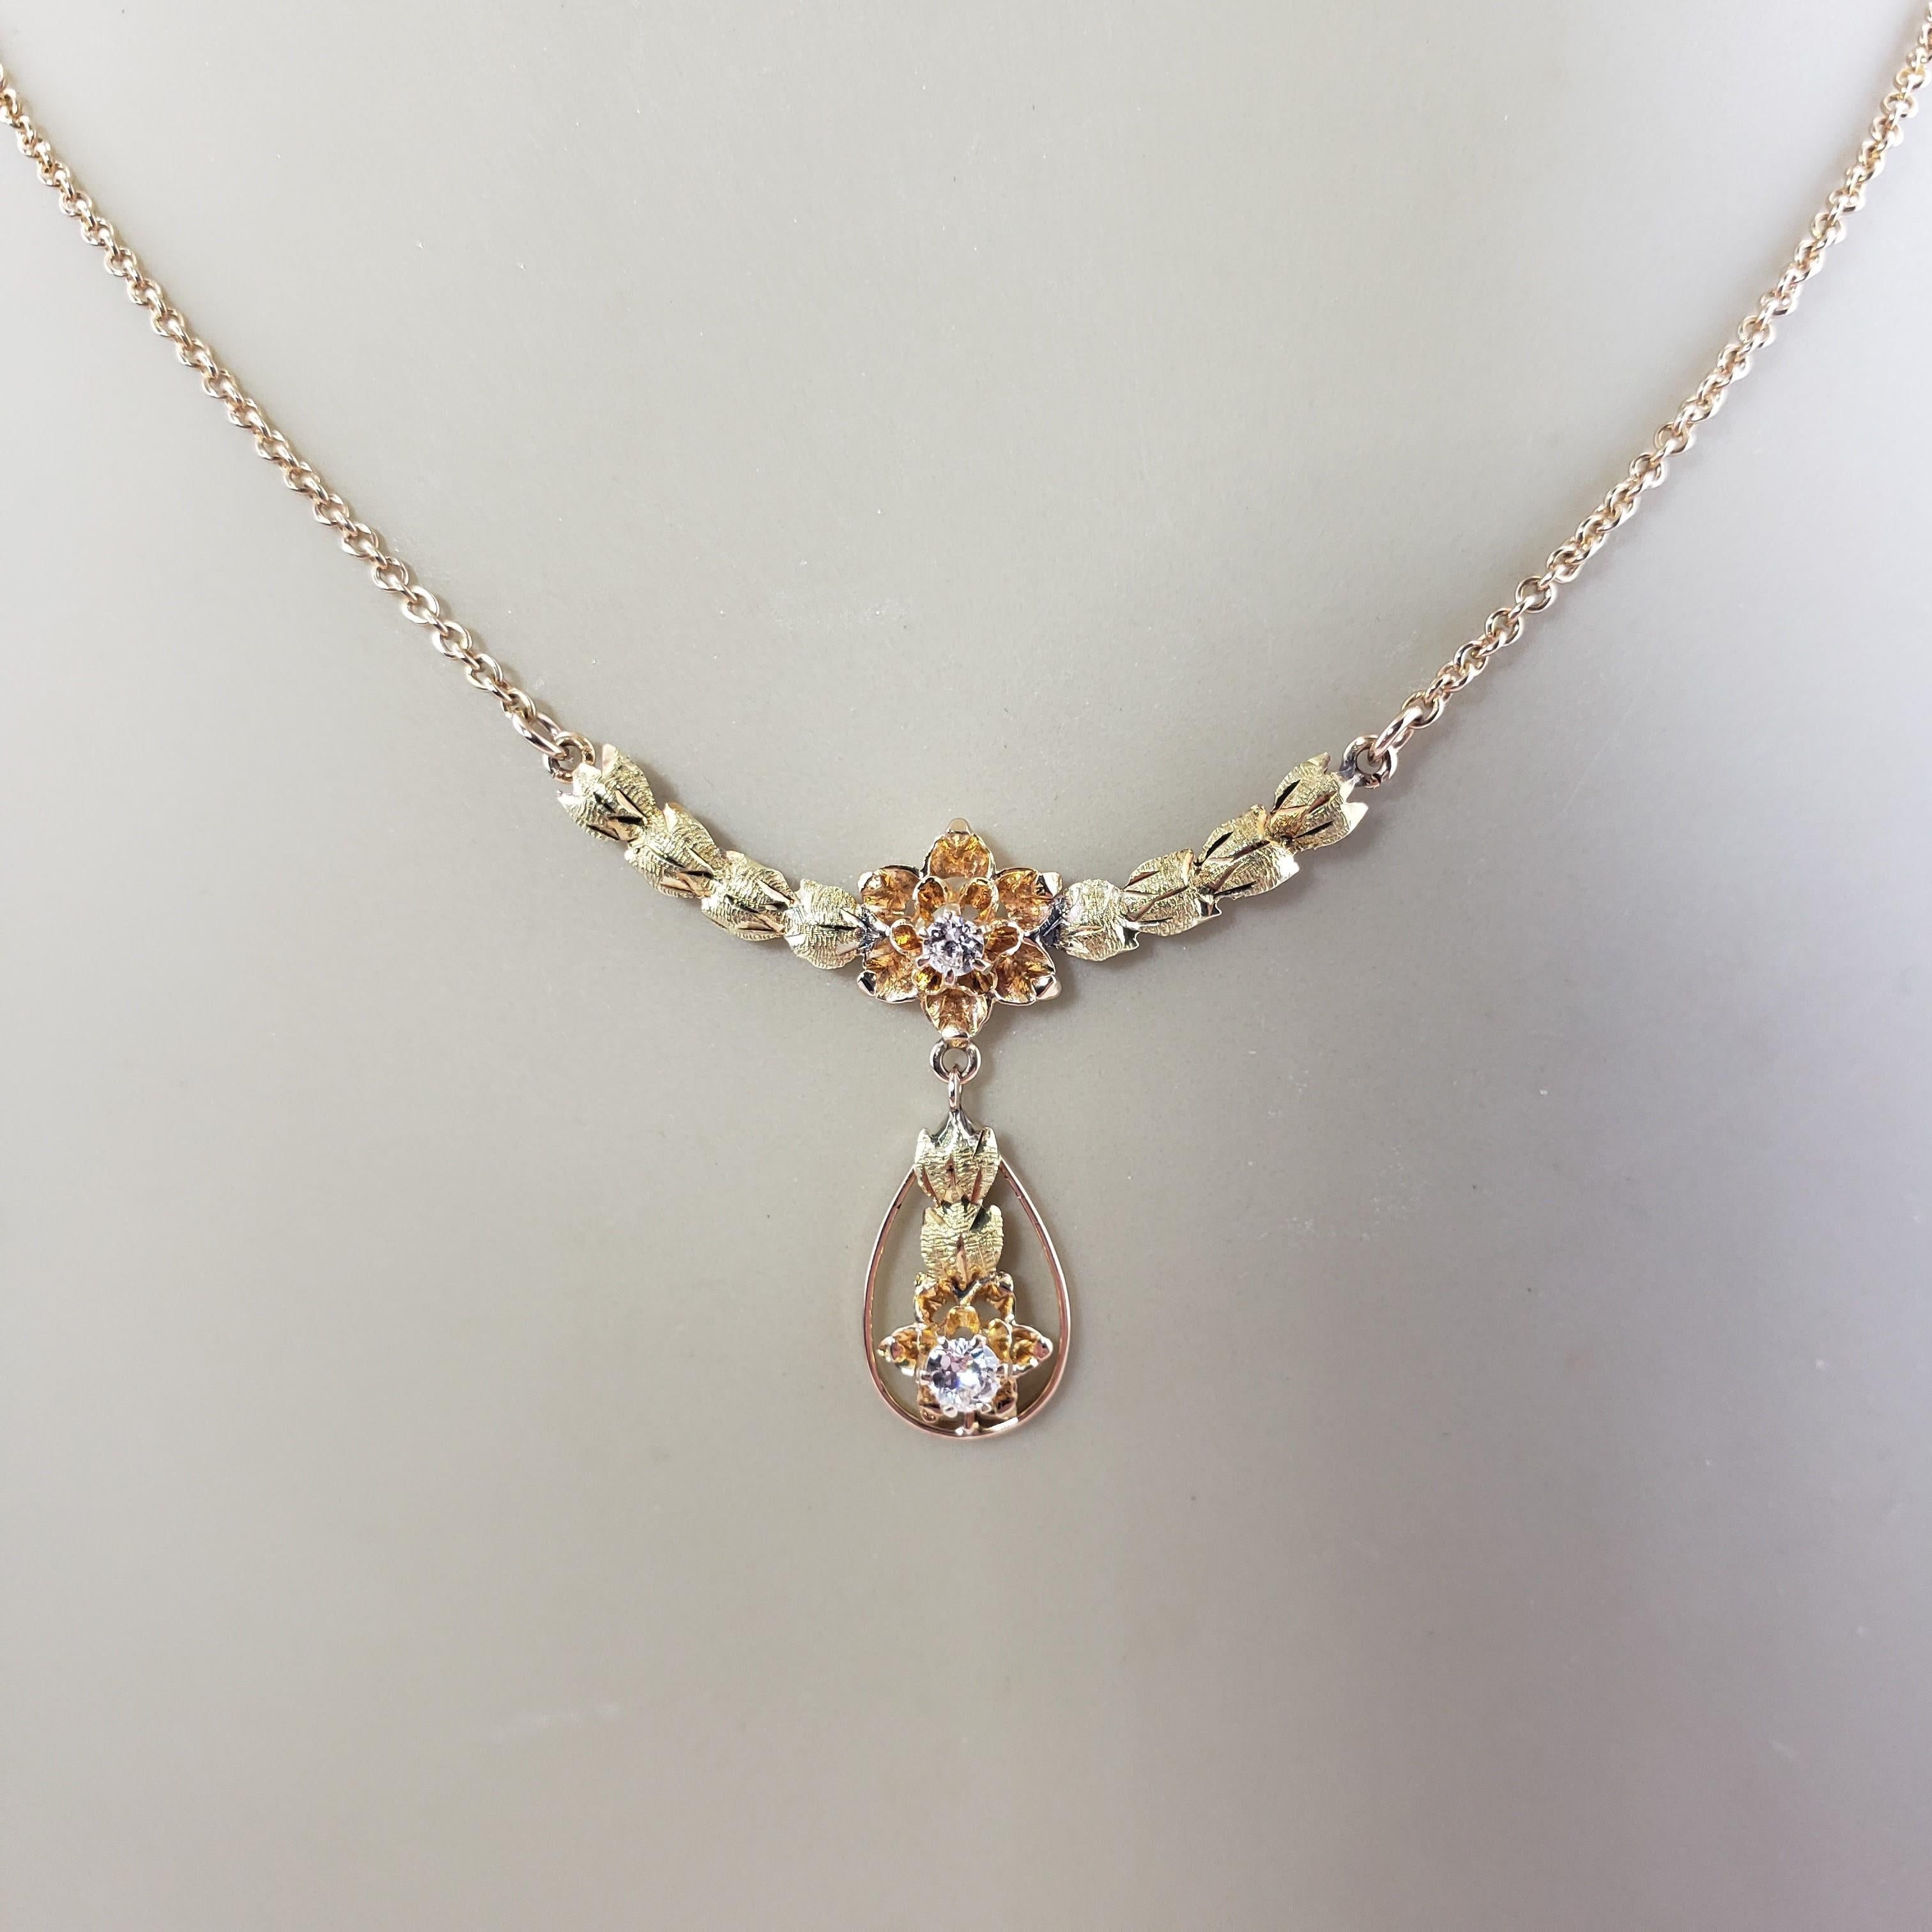 Vintage 14 Karat Yellow/Rose Gold and Diamond Floral Necklace-

This lovely floral necklace features two round brilliant cut diamonds* set in beautifully detailed 14K yellow and rose gold.

*Chip noted to diamond in drop not visible to naked